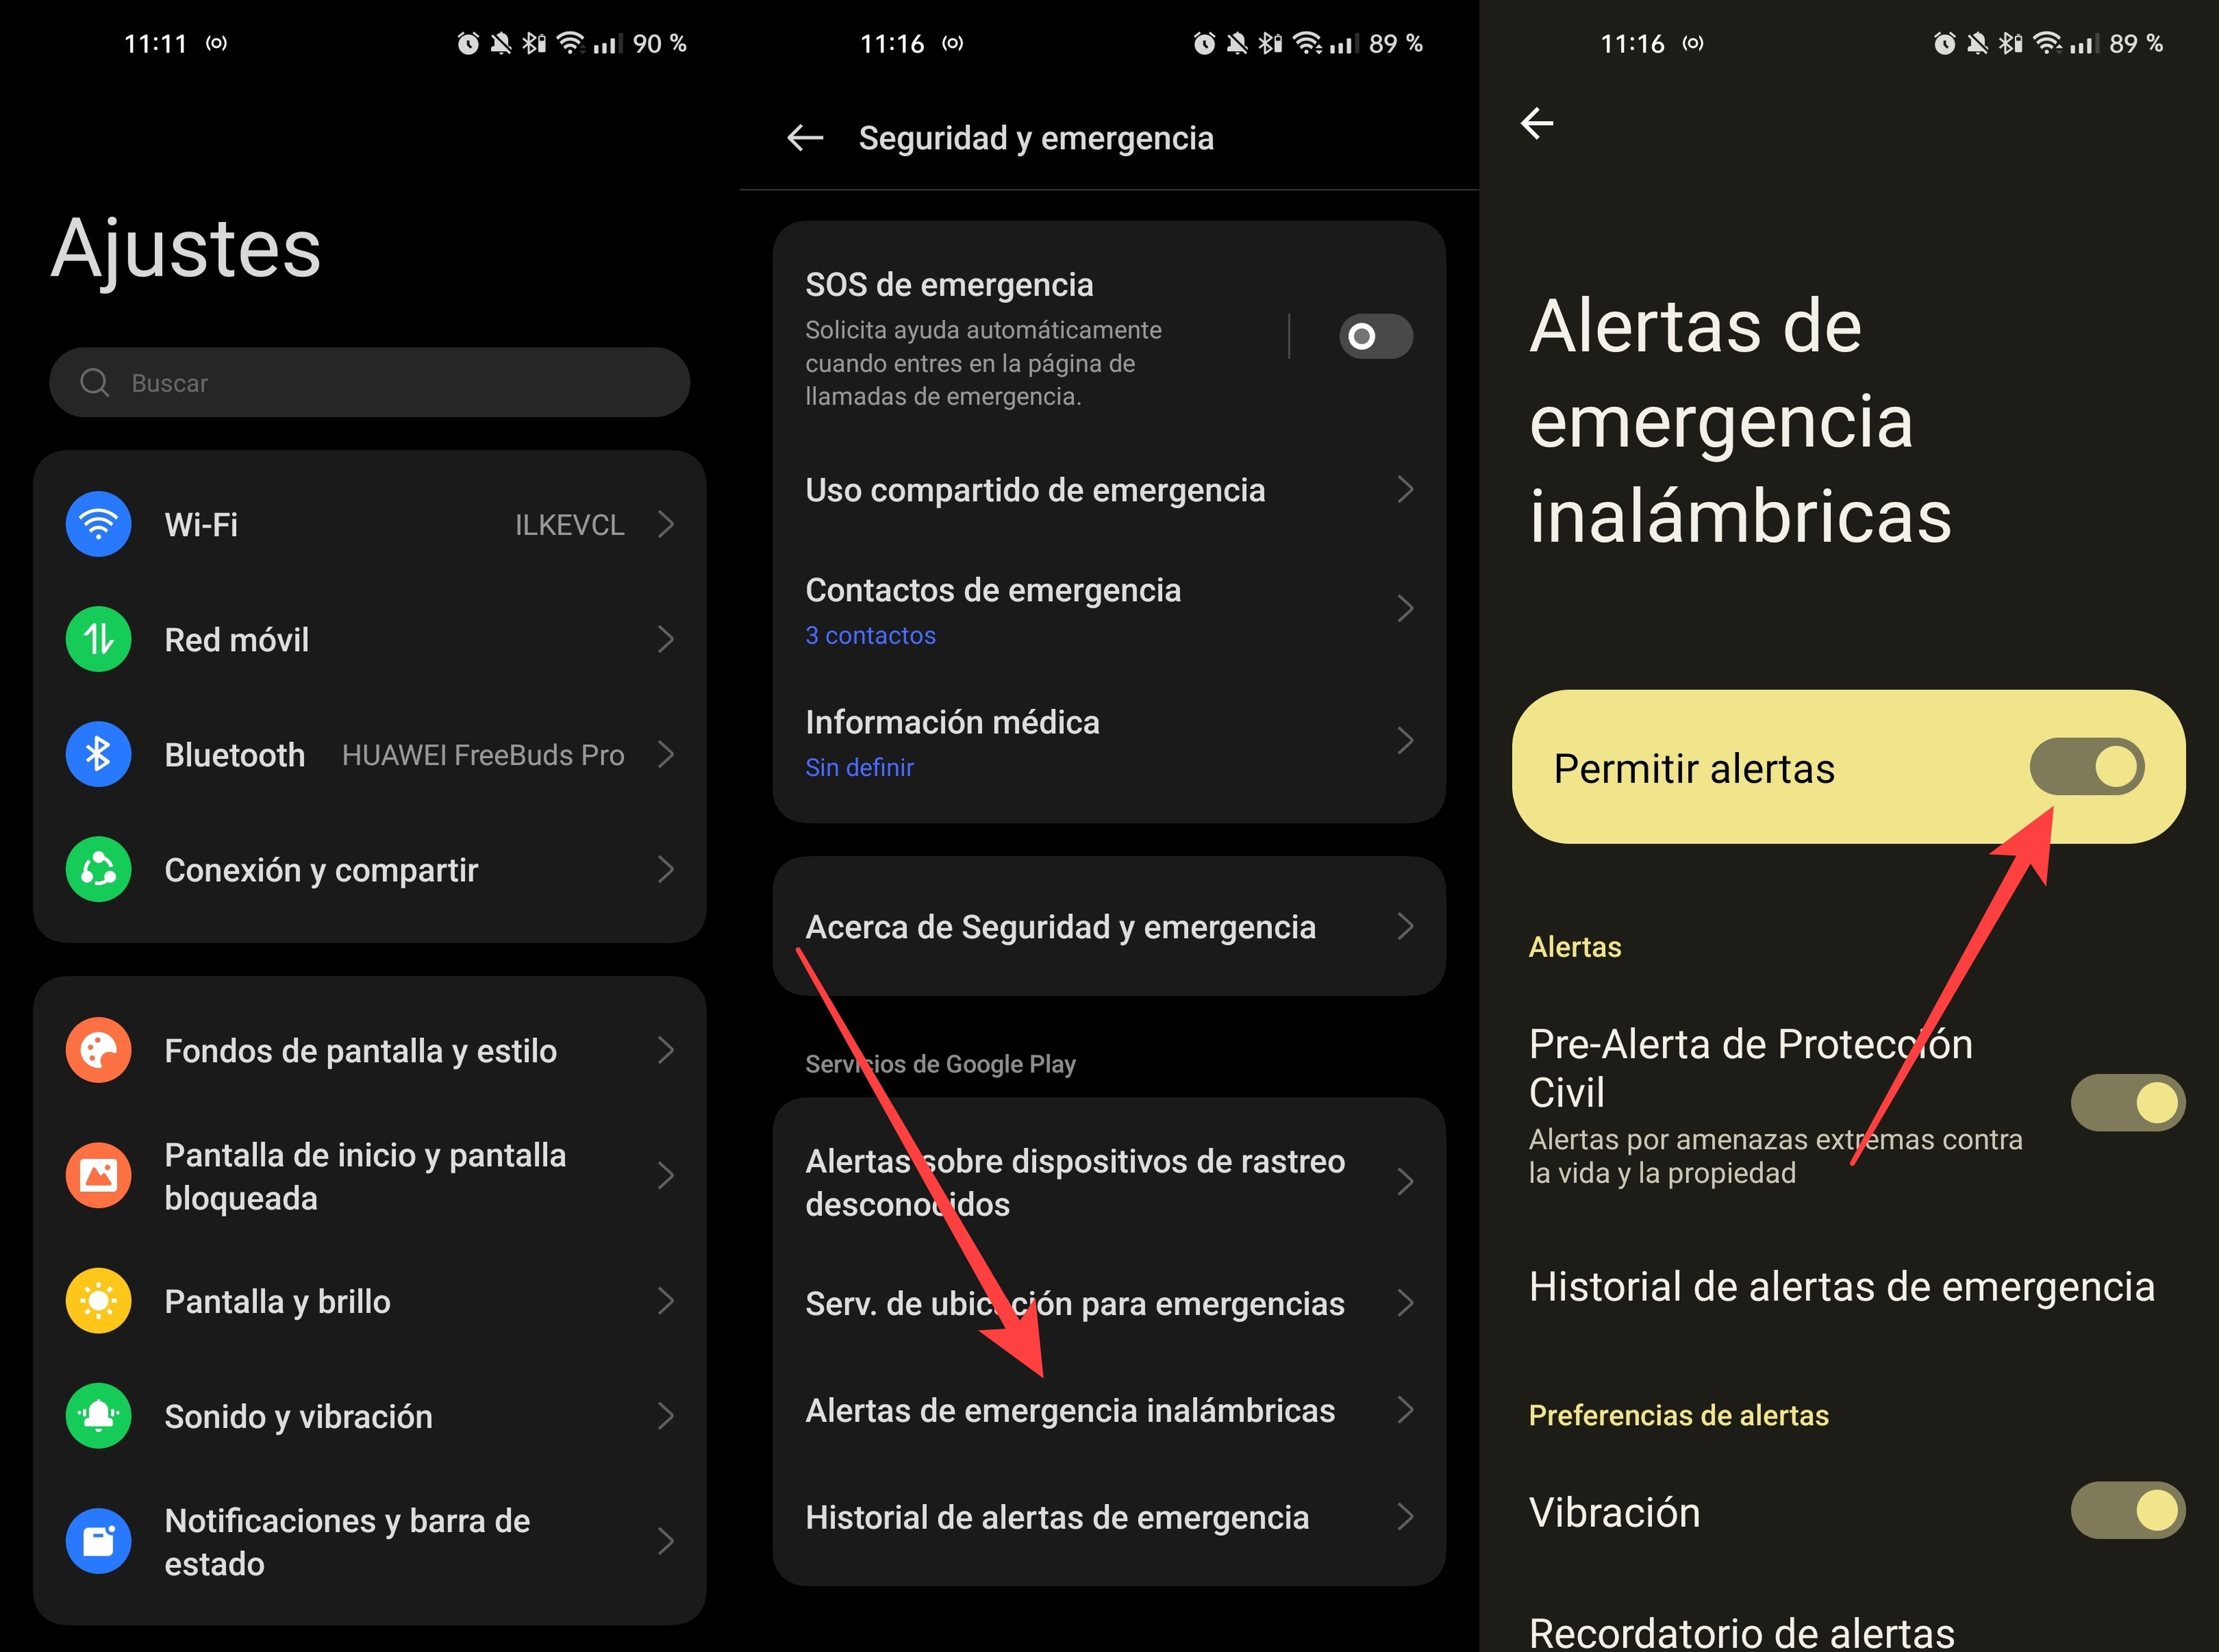 How to deactivate the ES-Alert Civil Protection alerts if you have a second hidden mobile